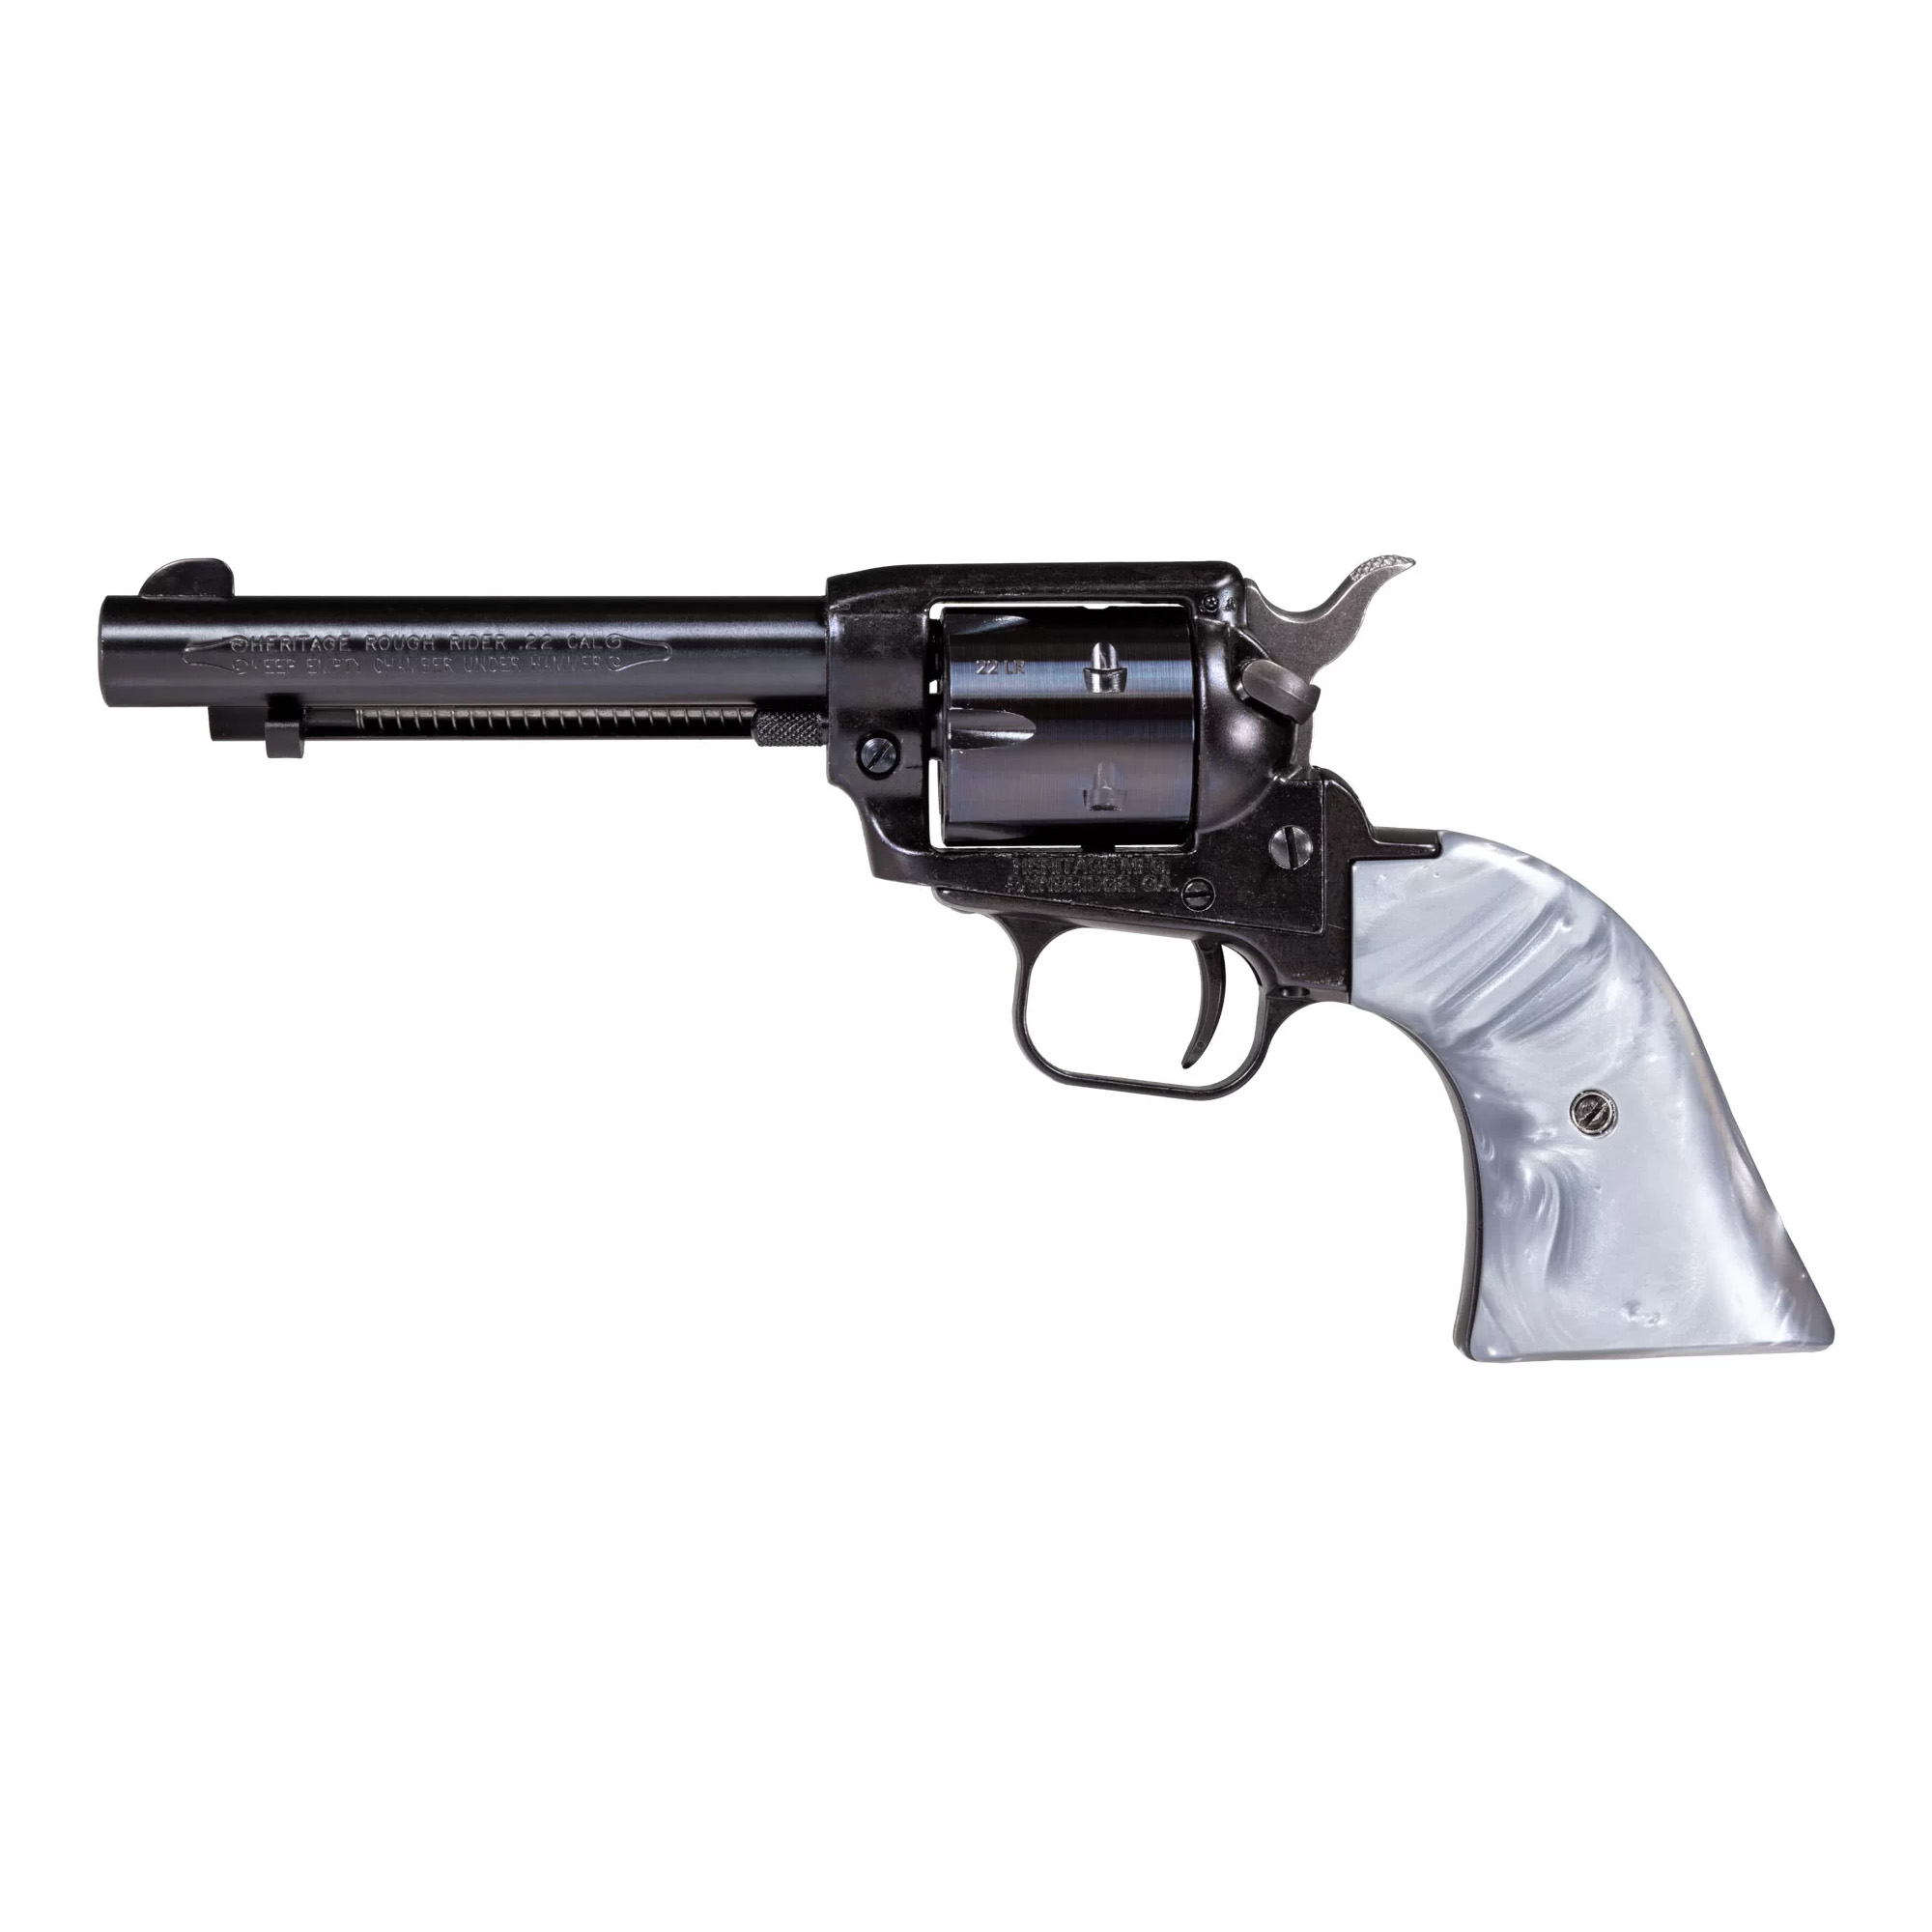 HERITAGE 22LR 4.75 6RD GRAY PEARL